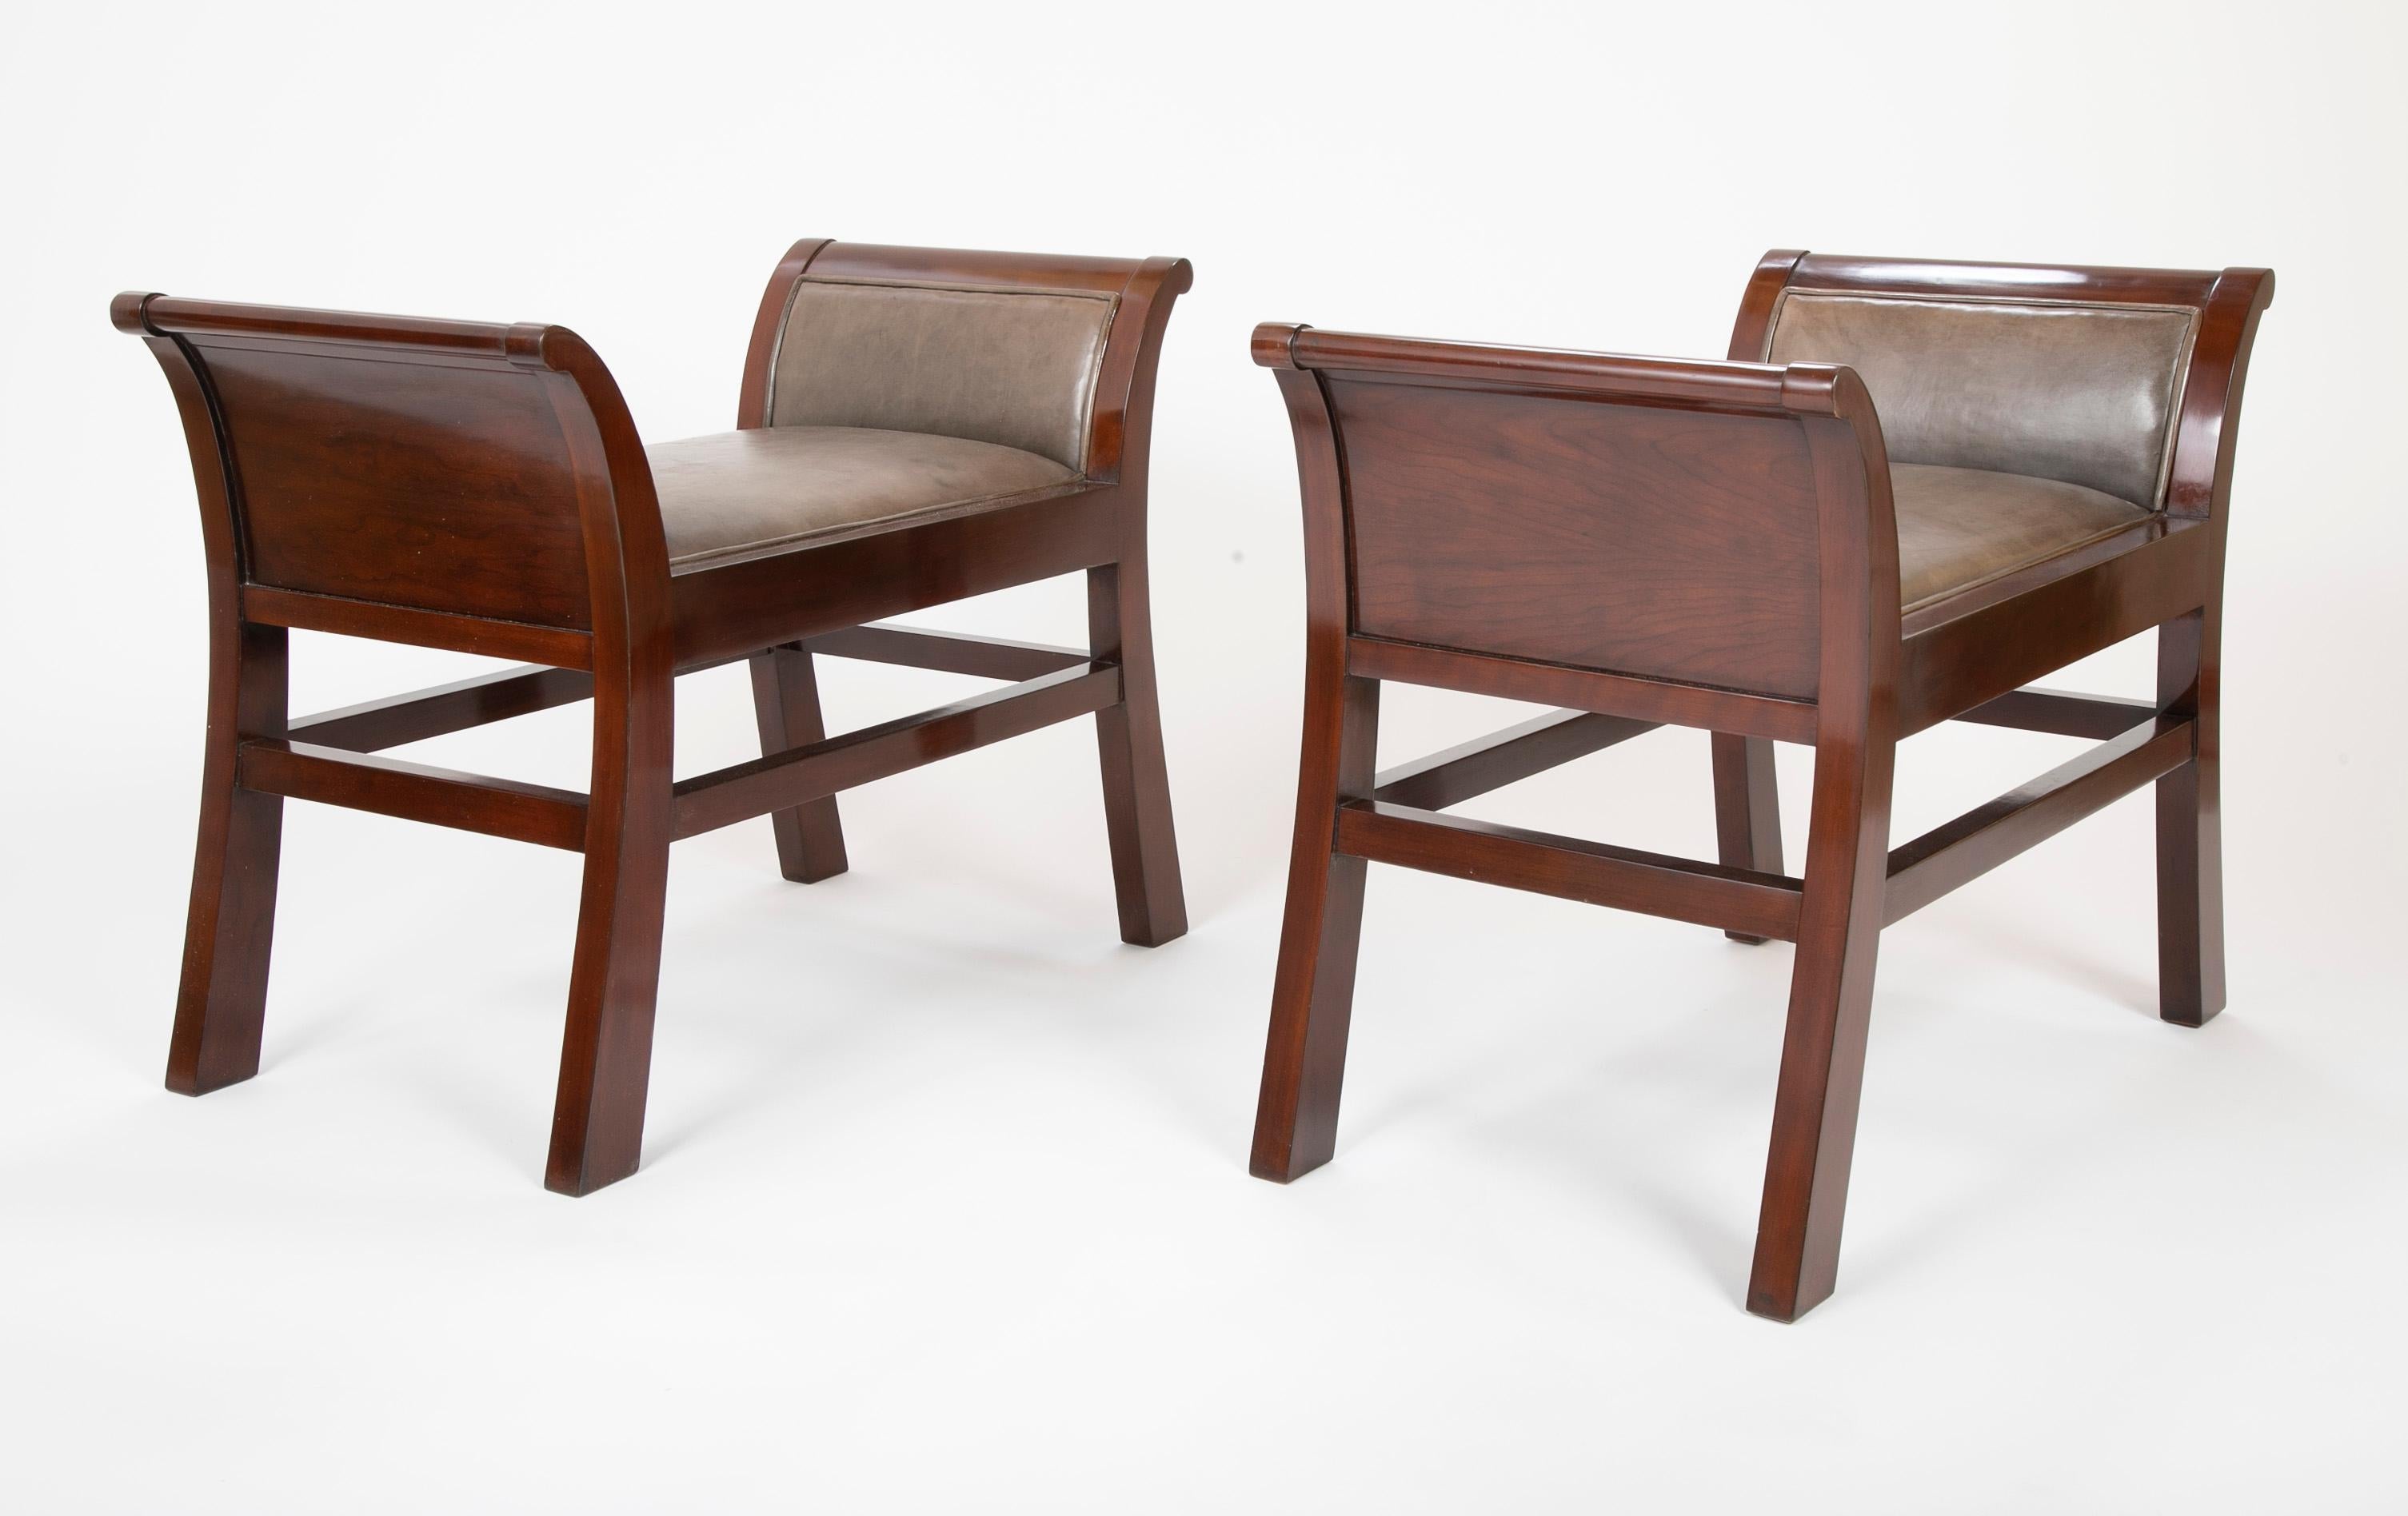 Leather and mahogany benches designed Jacques Grange for John Widdicomb.